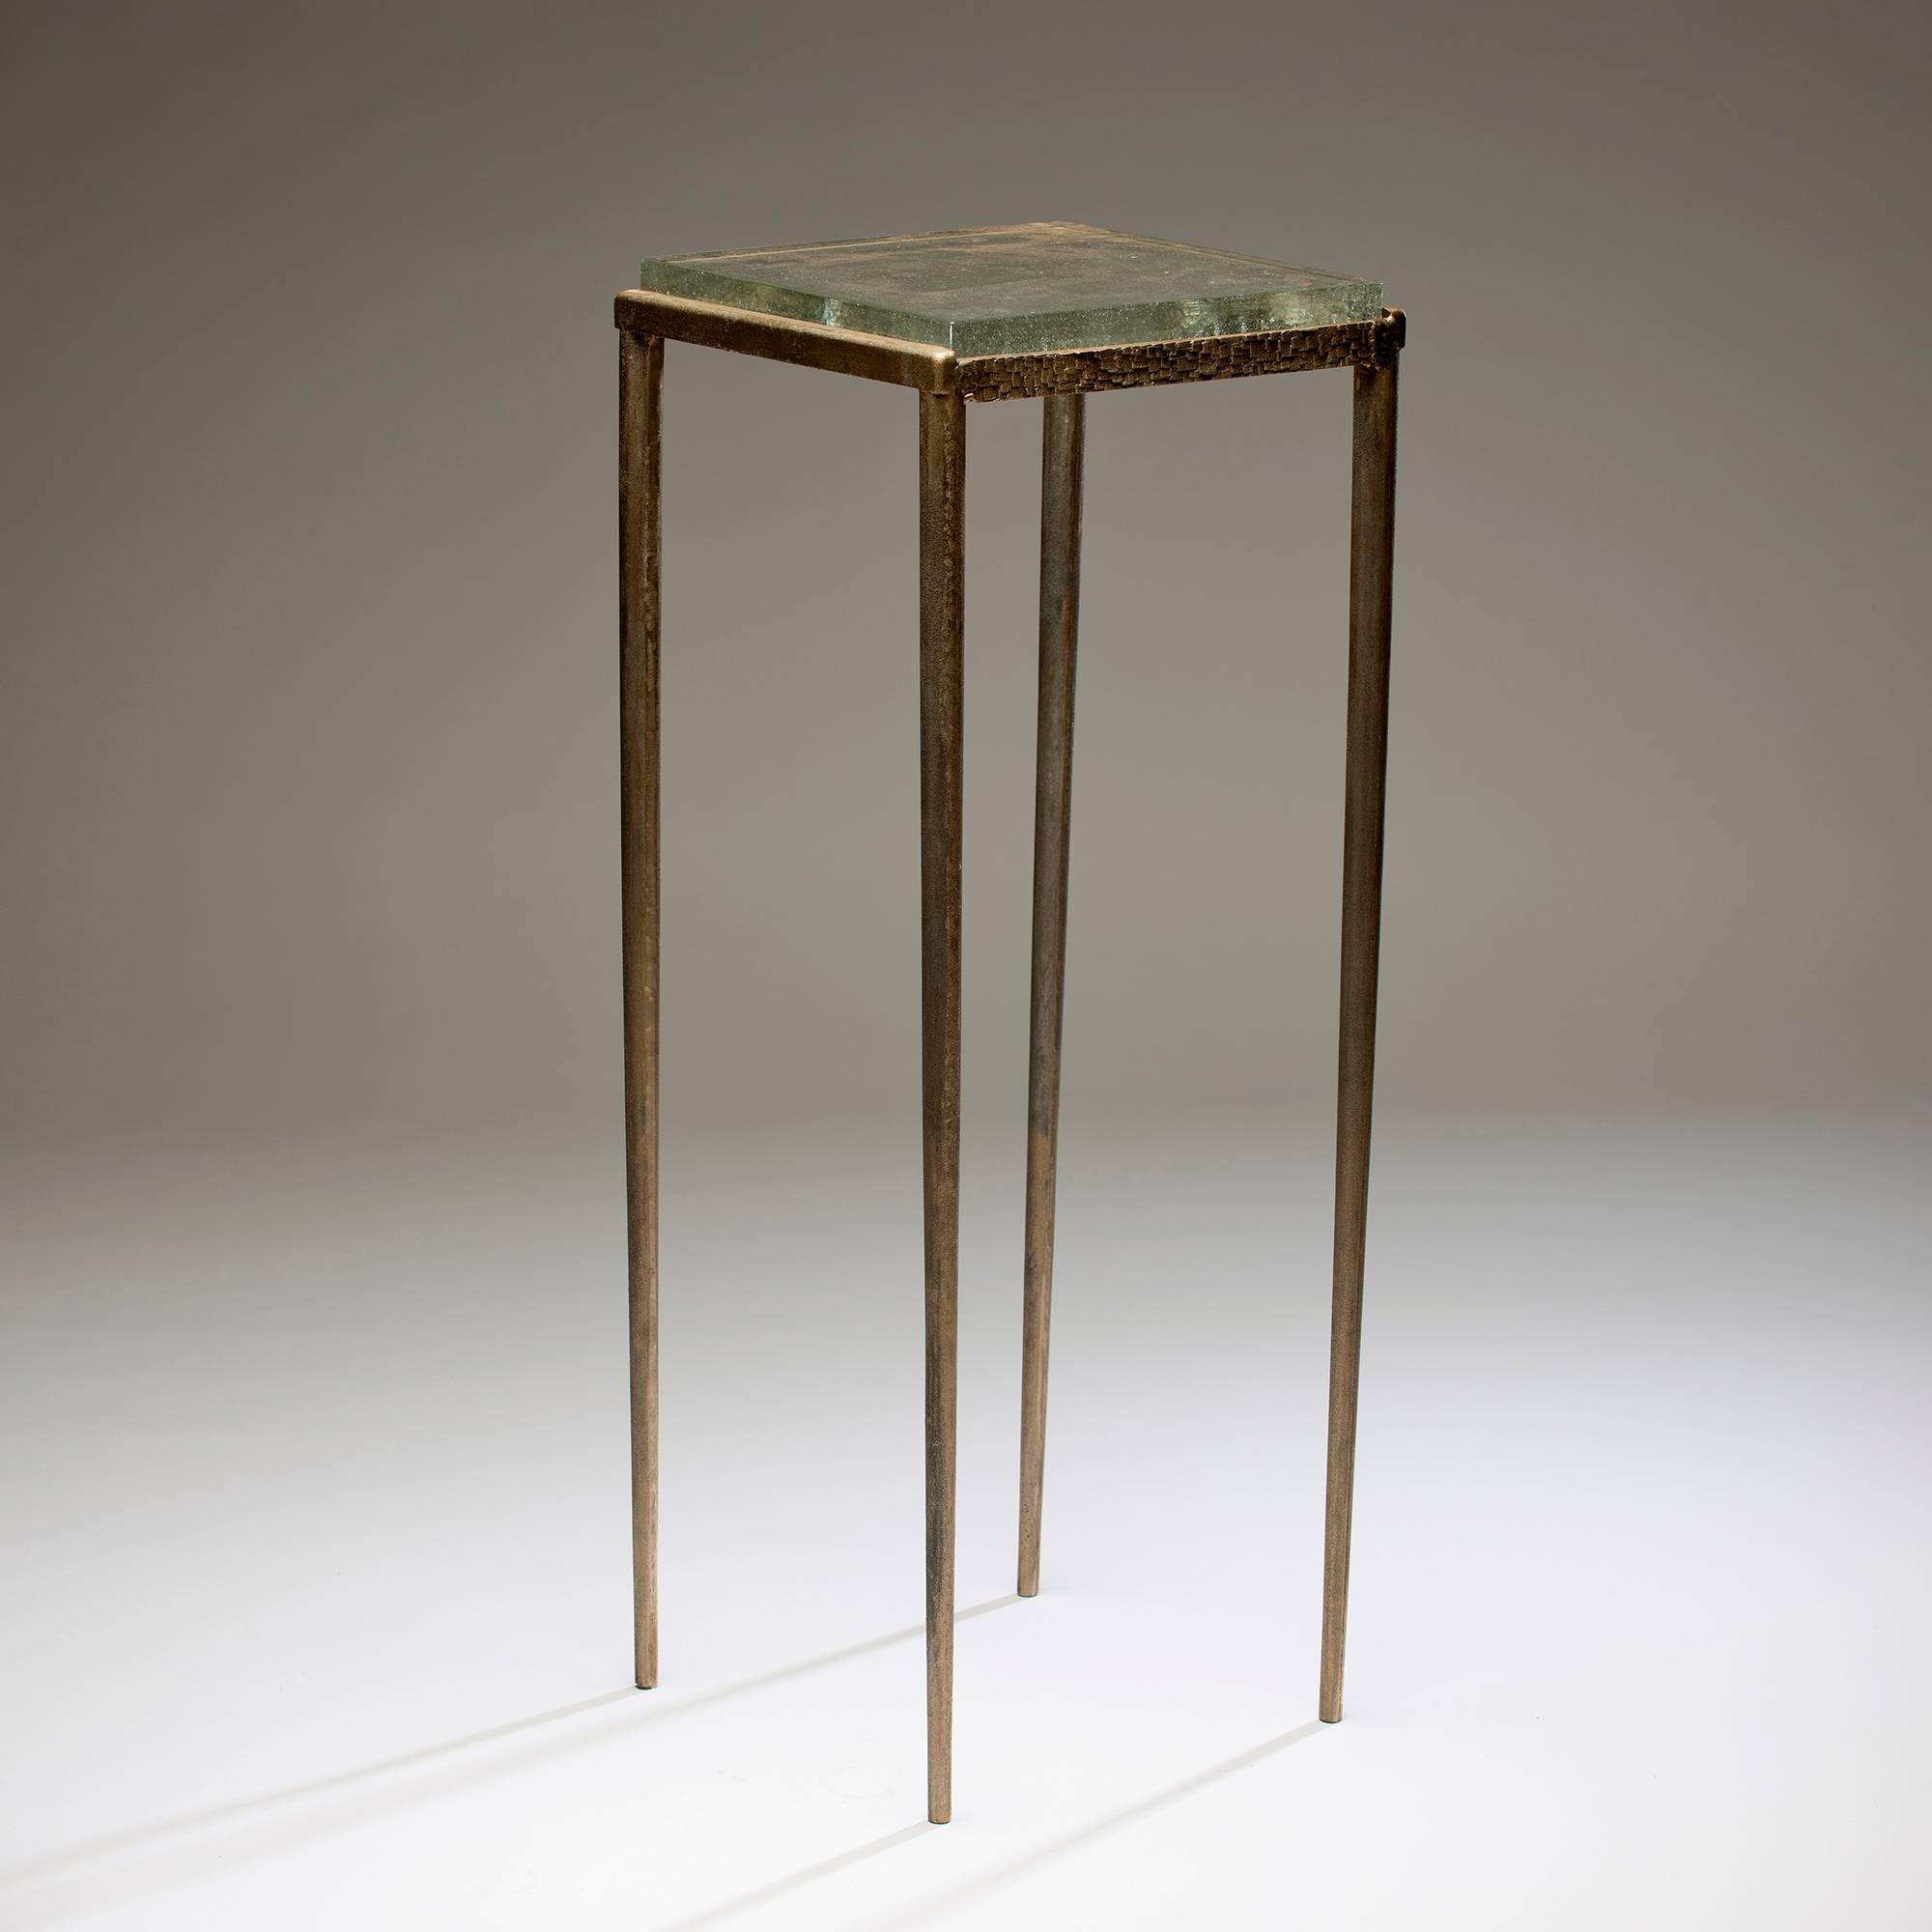 Gregory Nangle
Ash side table, 2016
Cast bronze, cast glass
Measures: 12.5 x 12.5 x 34 in
Edition of 6

The Gregory Nangle aesthetic explores what happens when geometry is interjected into nature. His work juxtaposes Minimalist geometry with